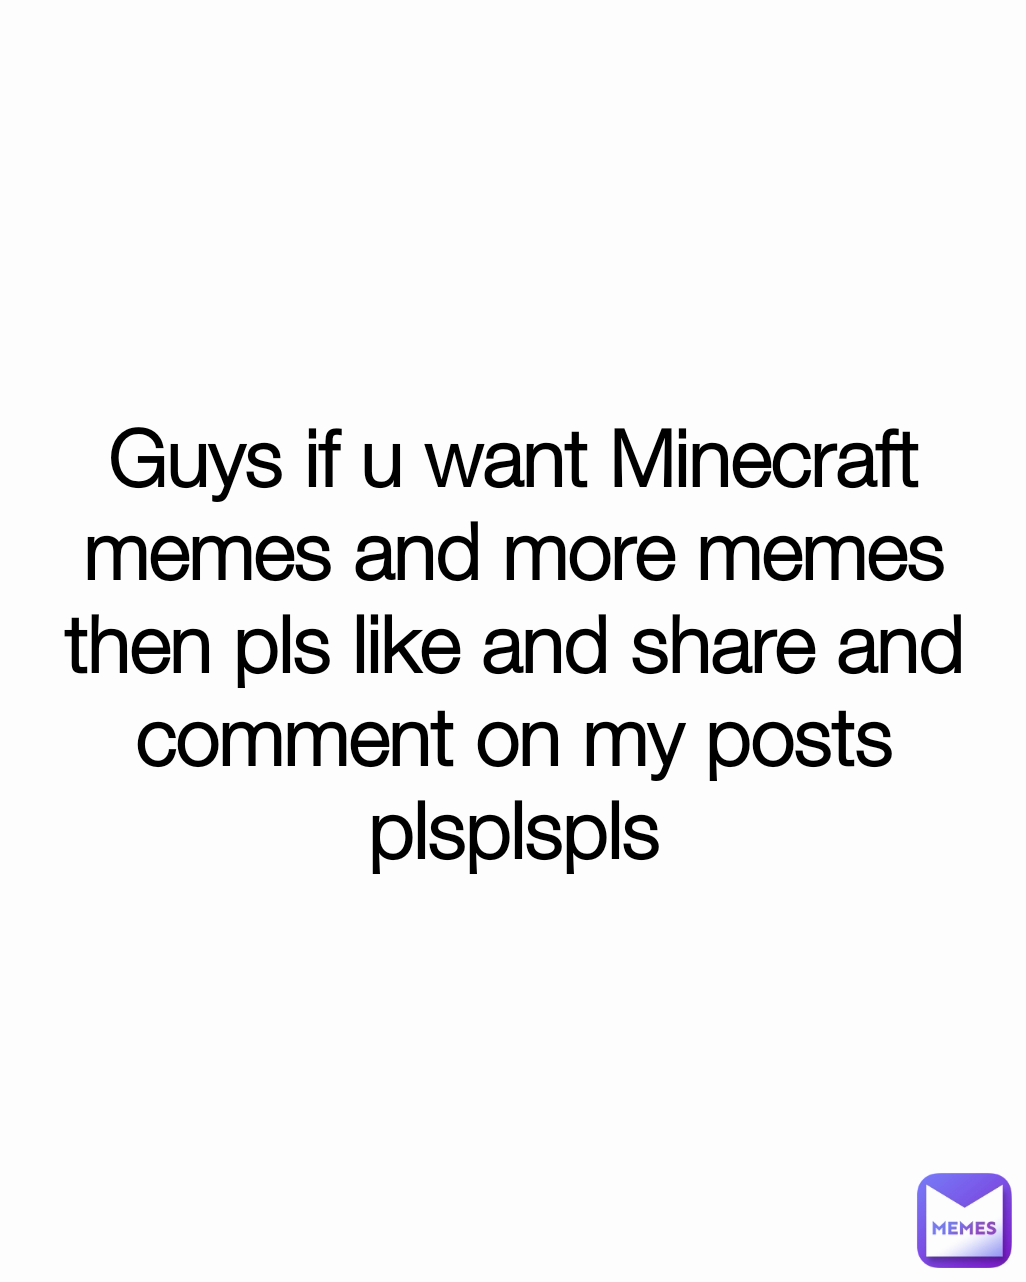 Guys if u want Minecraft memes and more memes then pls like and share and comment on my posts plsplspls